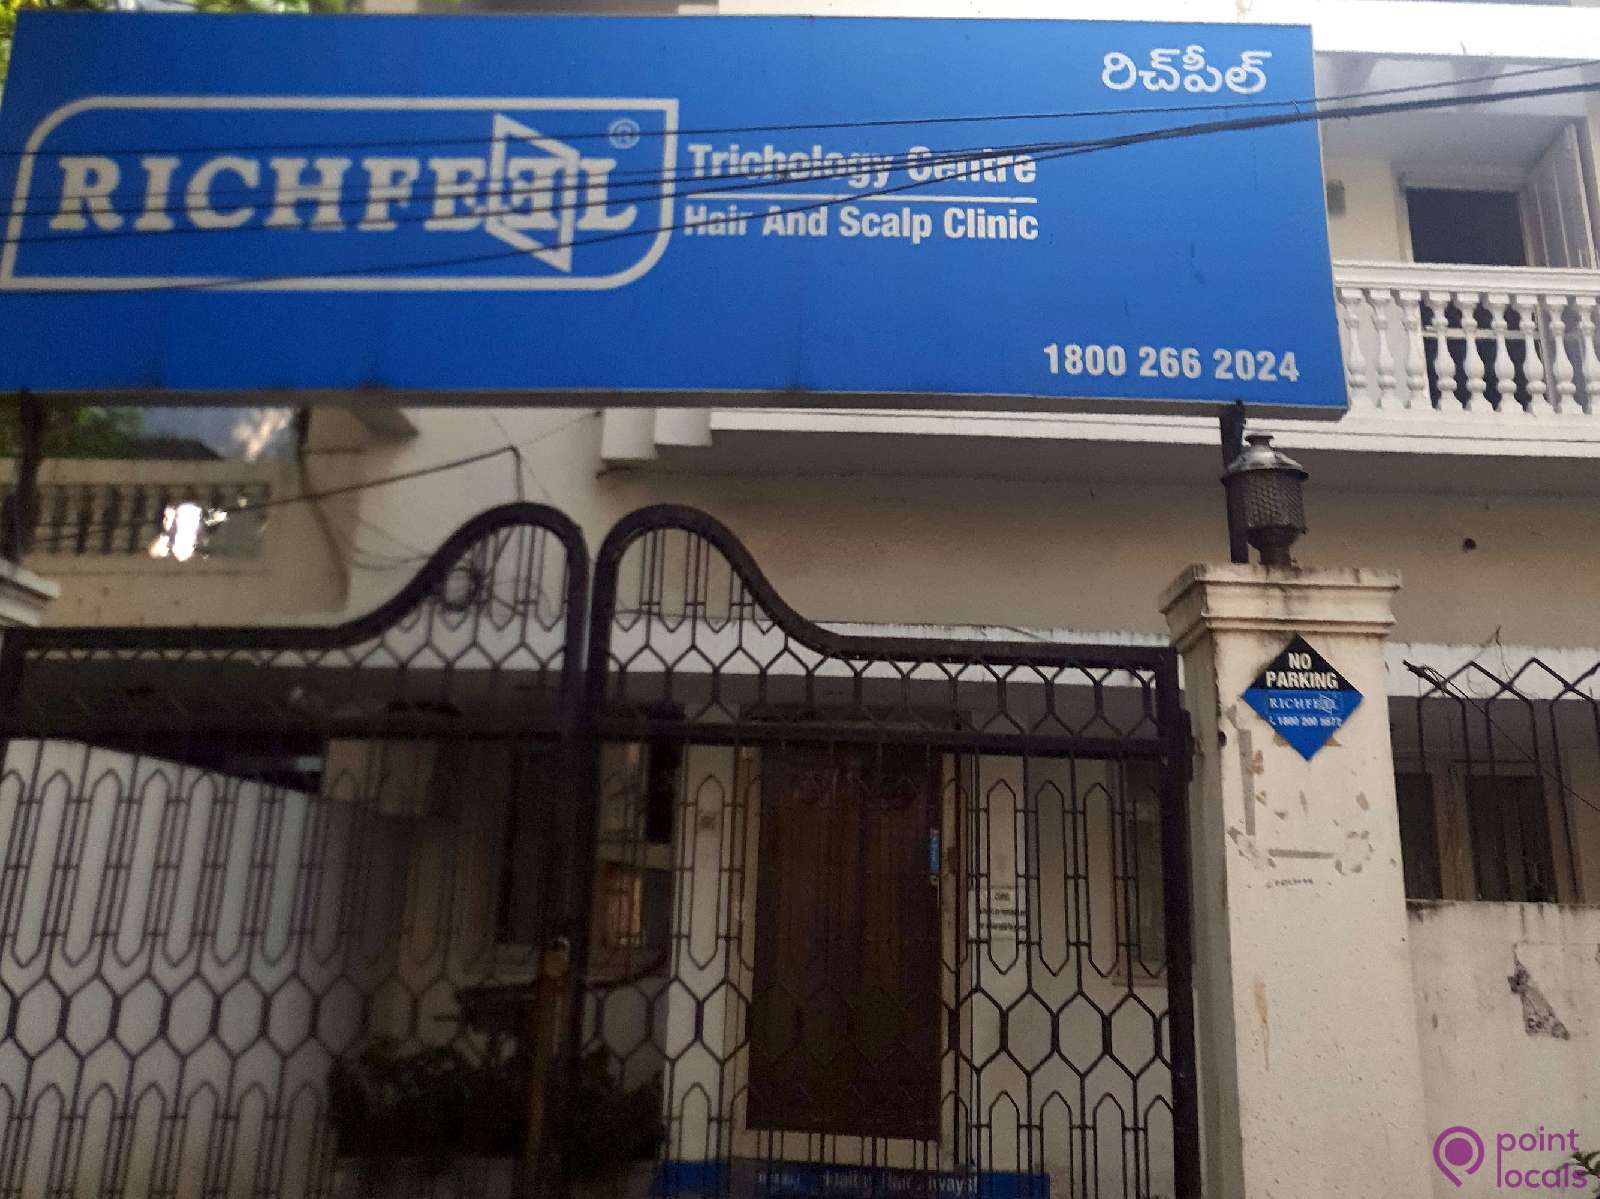 Richfeel Trichology Centre & Hair And Scalp Clinic - Clinic in  Hyderabad,Telangana | Pointlocals